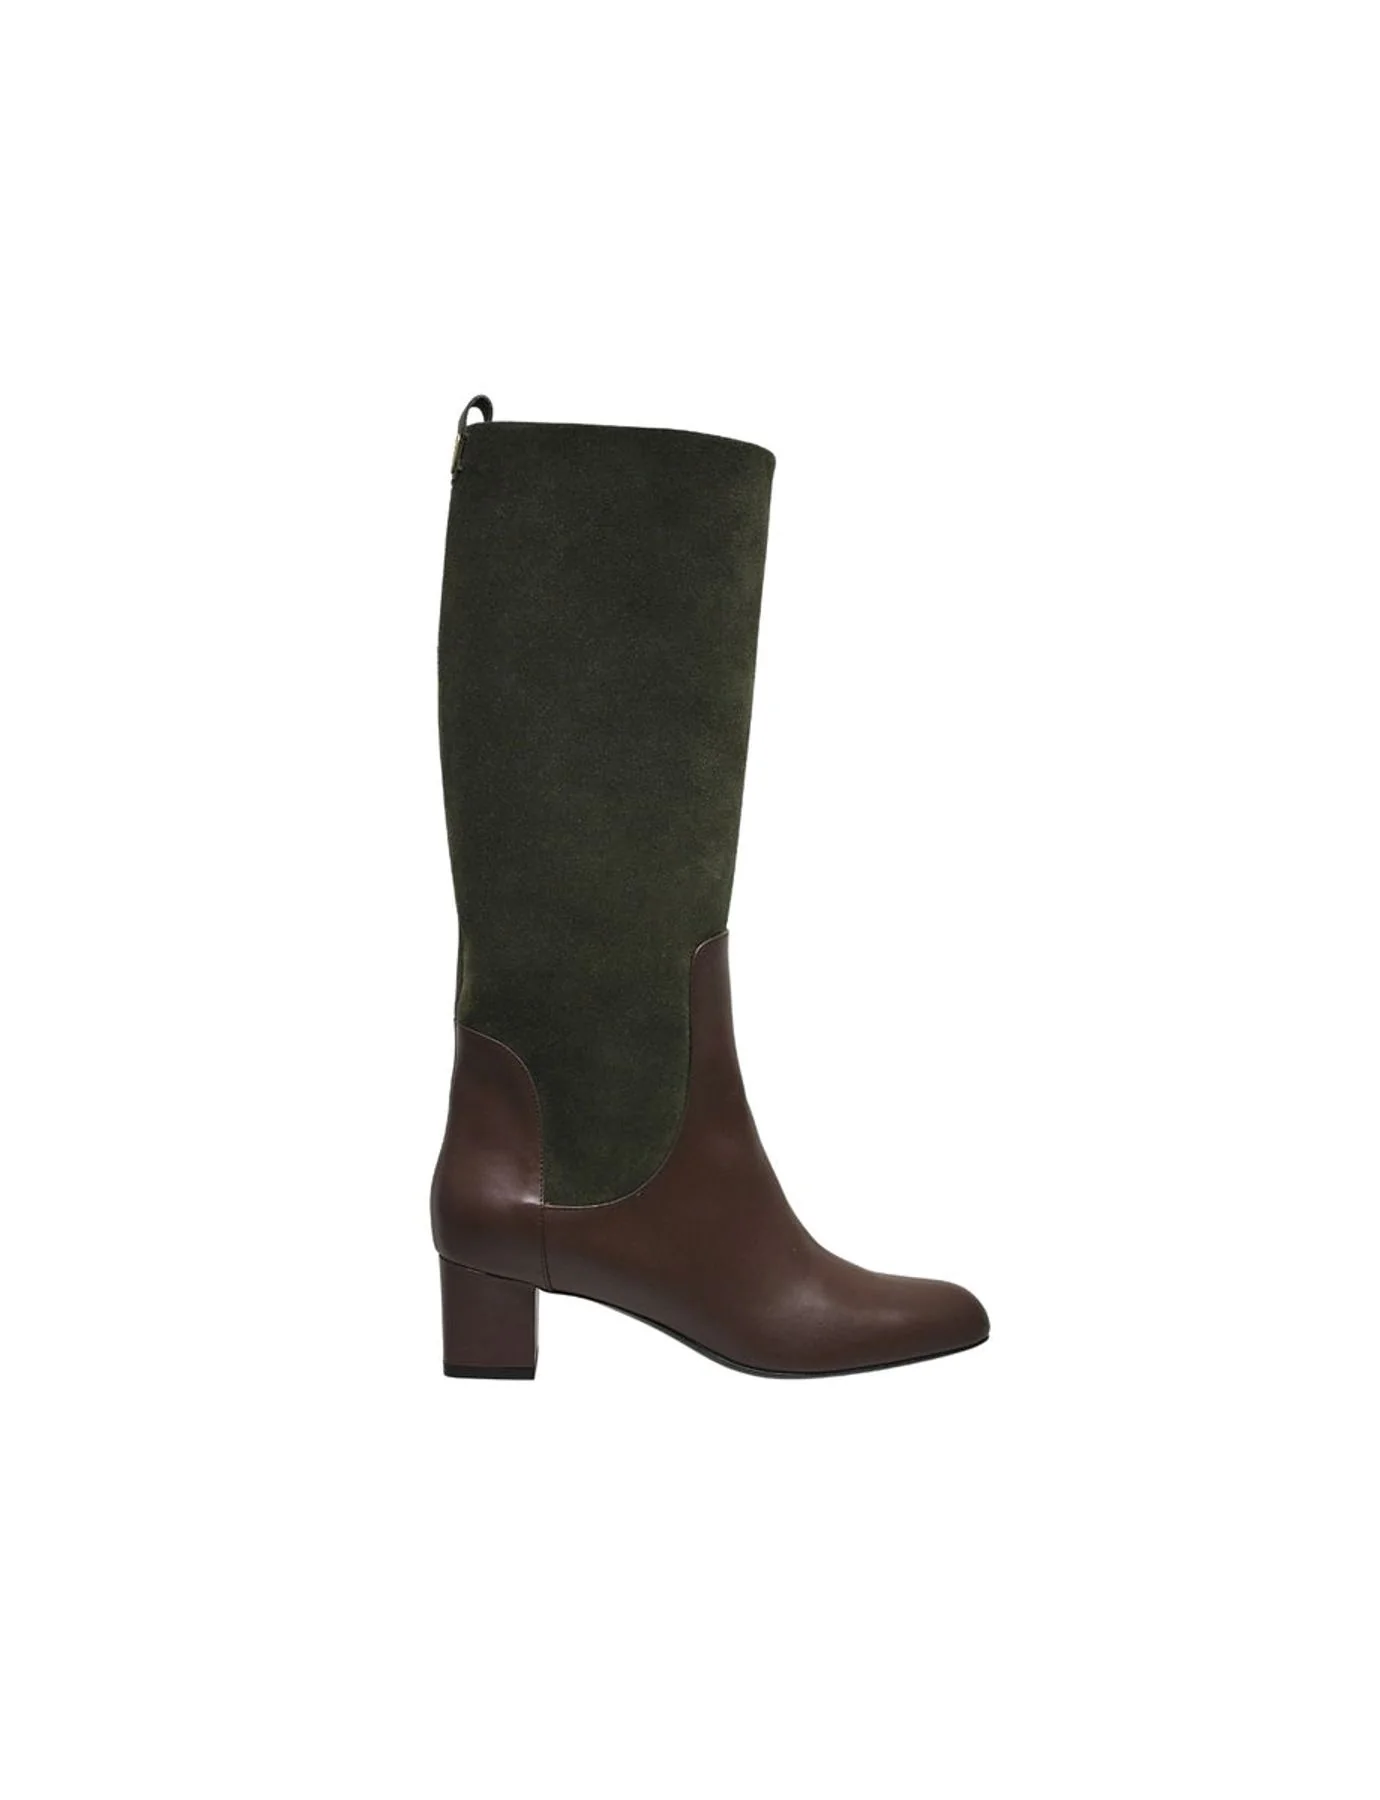 boots-a-talons-green-and-brown-in-leather